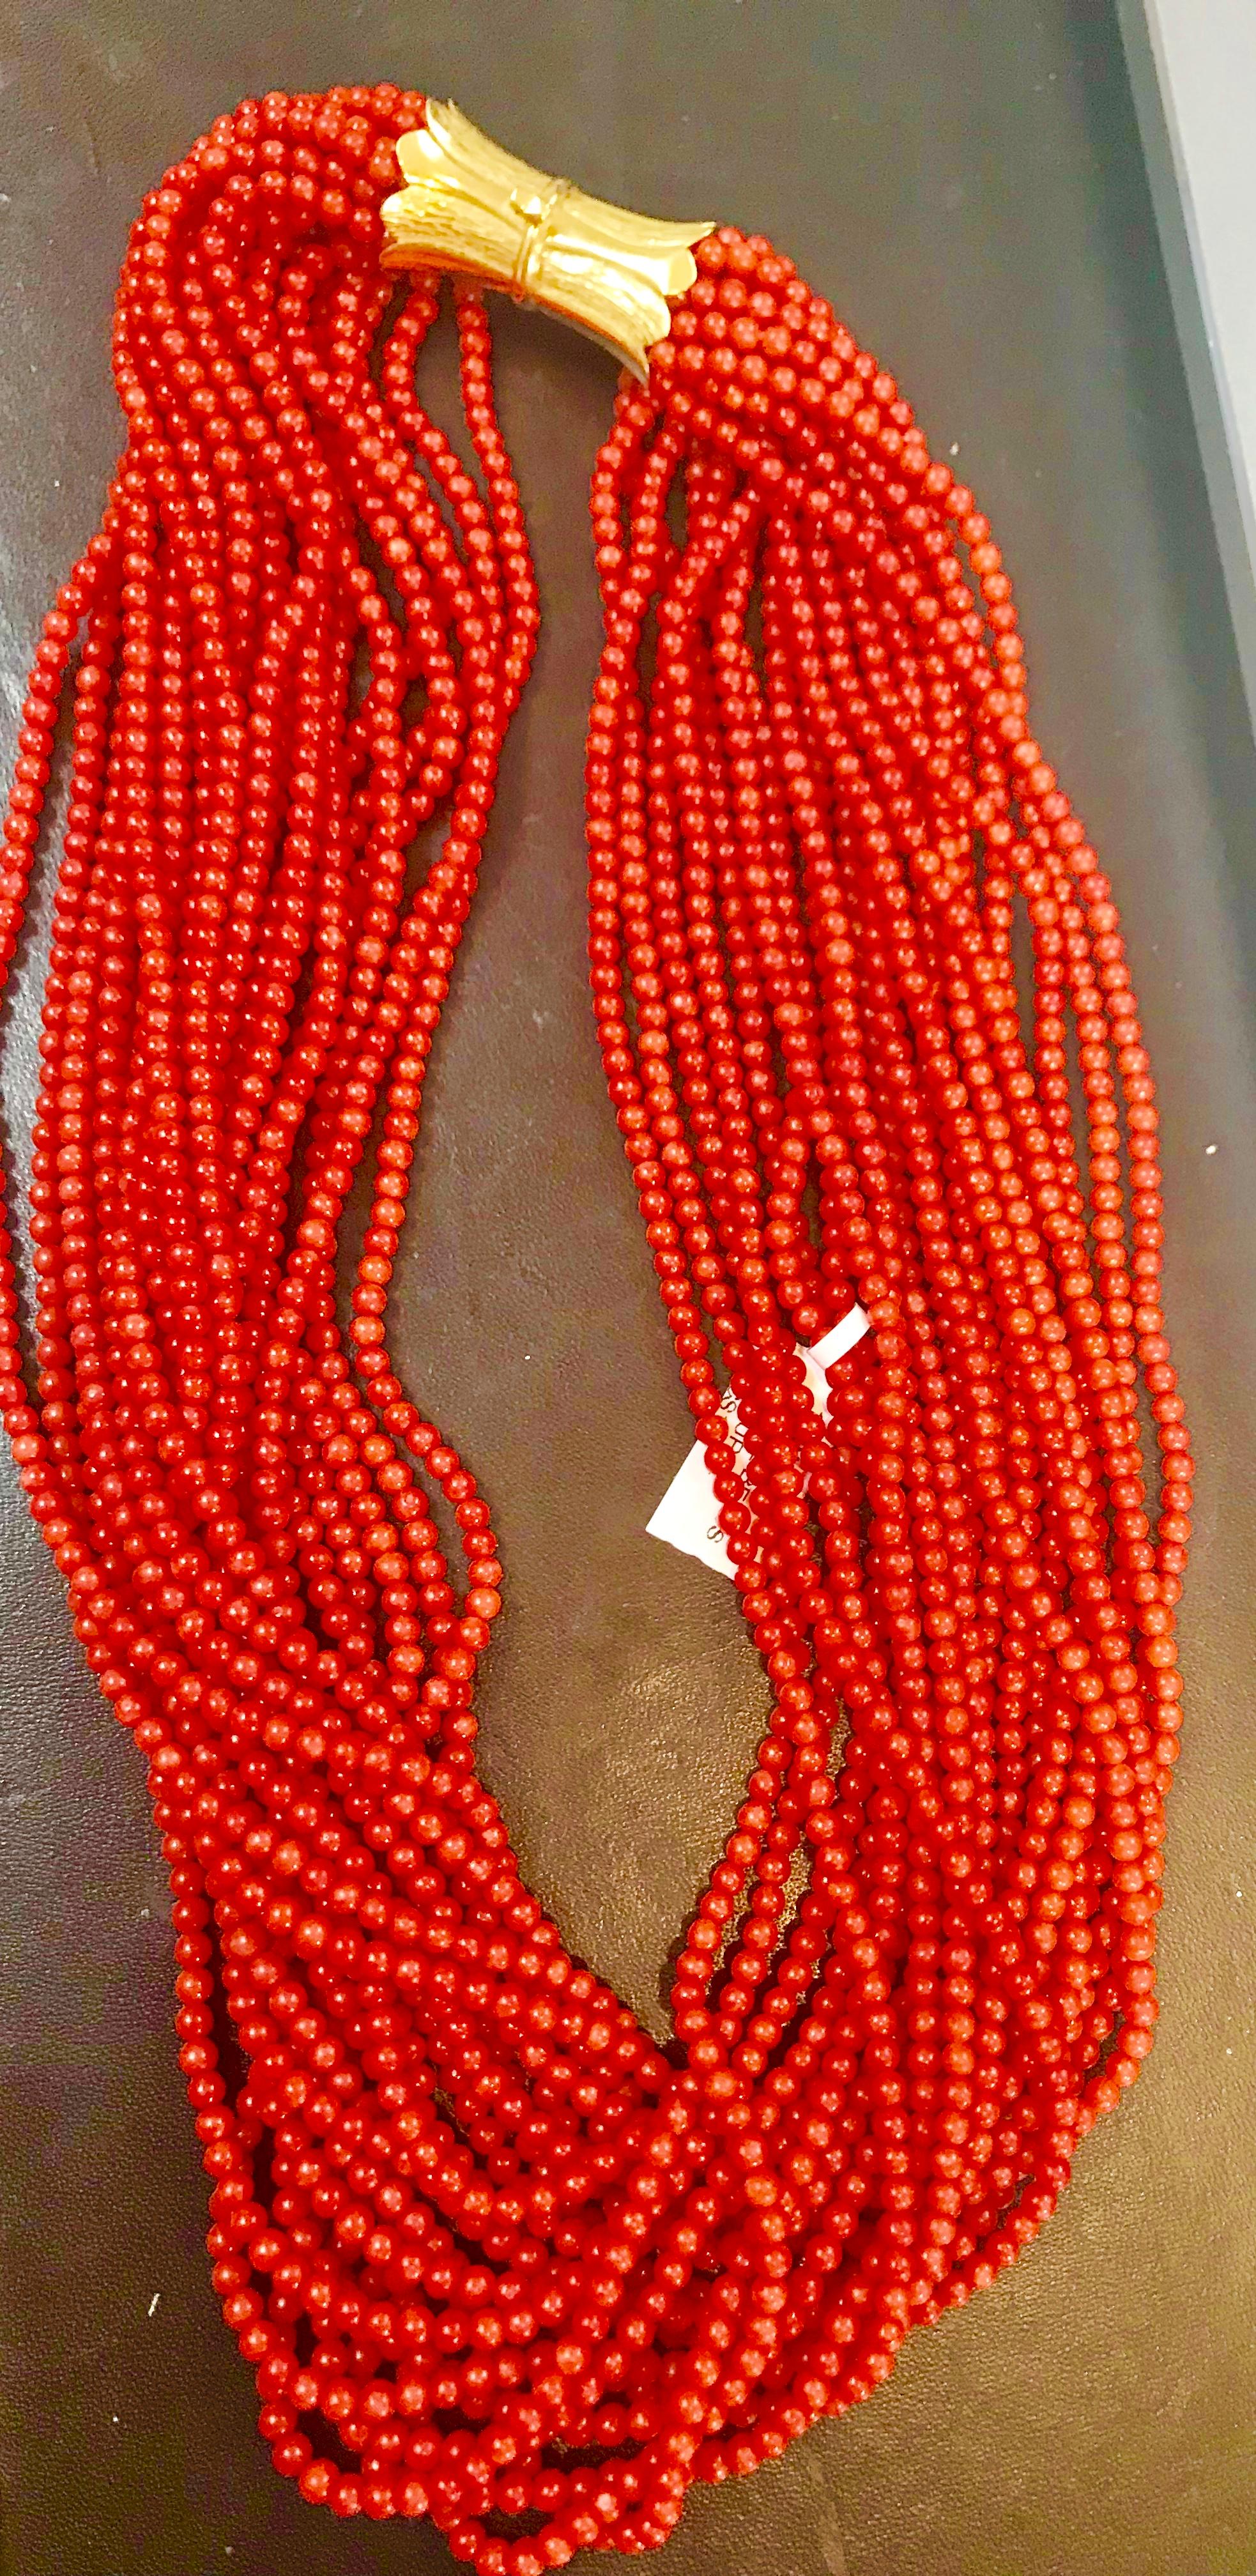  Natural Coral Multi Layer Bead Necklace 18 Karat  Yellow Gold Clasp Estate.
21 layers of Natural Coral Beads
Very hard to find coral pieces now 
Gold: 18 carat Yellow  Gold 26 Grams

Please look at all the pictures
Its very hard to capture the true